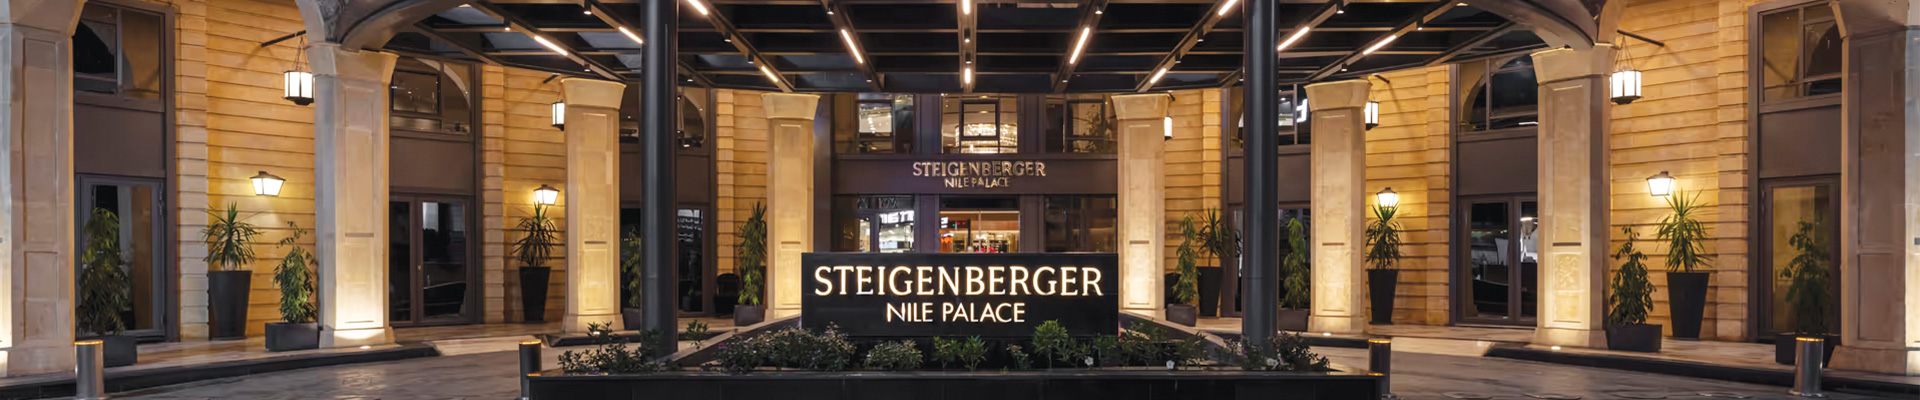 5* Steigenberger Nile Palace - Luxor - Egypt Package (5 nights)